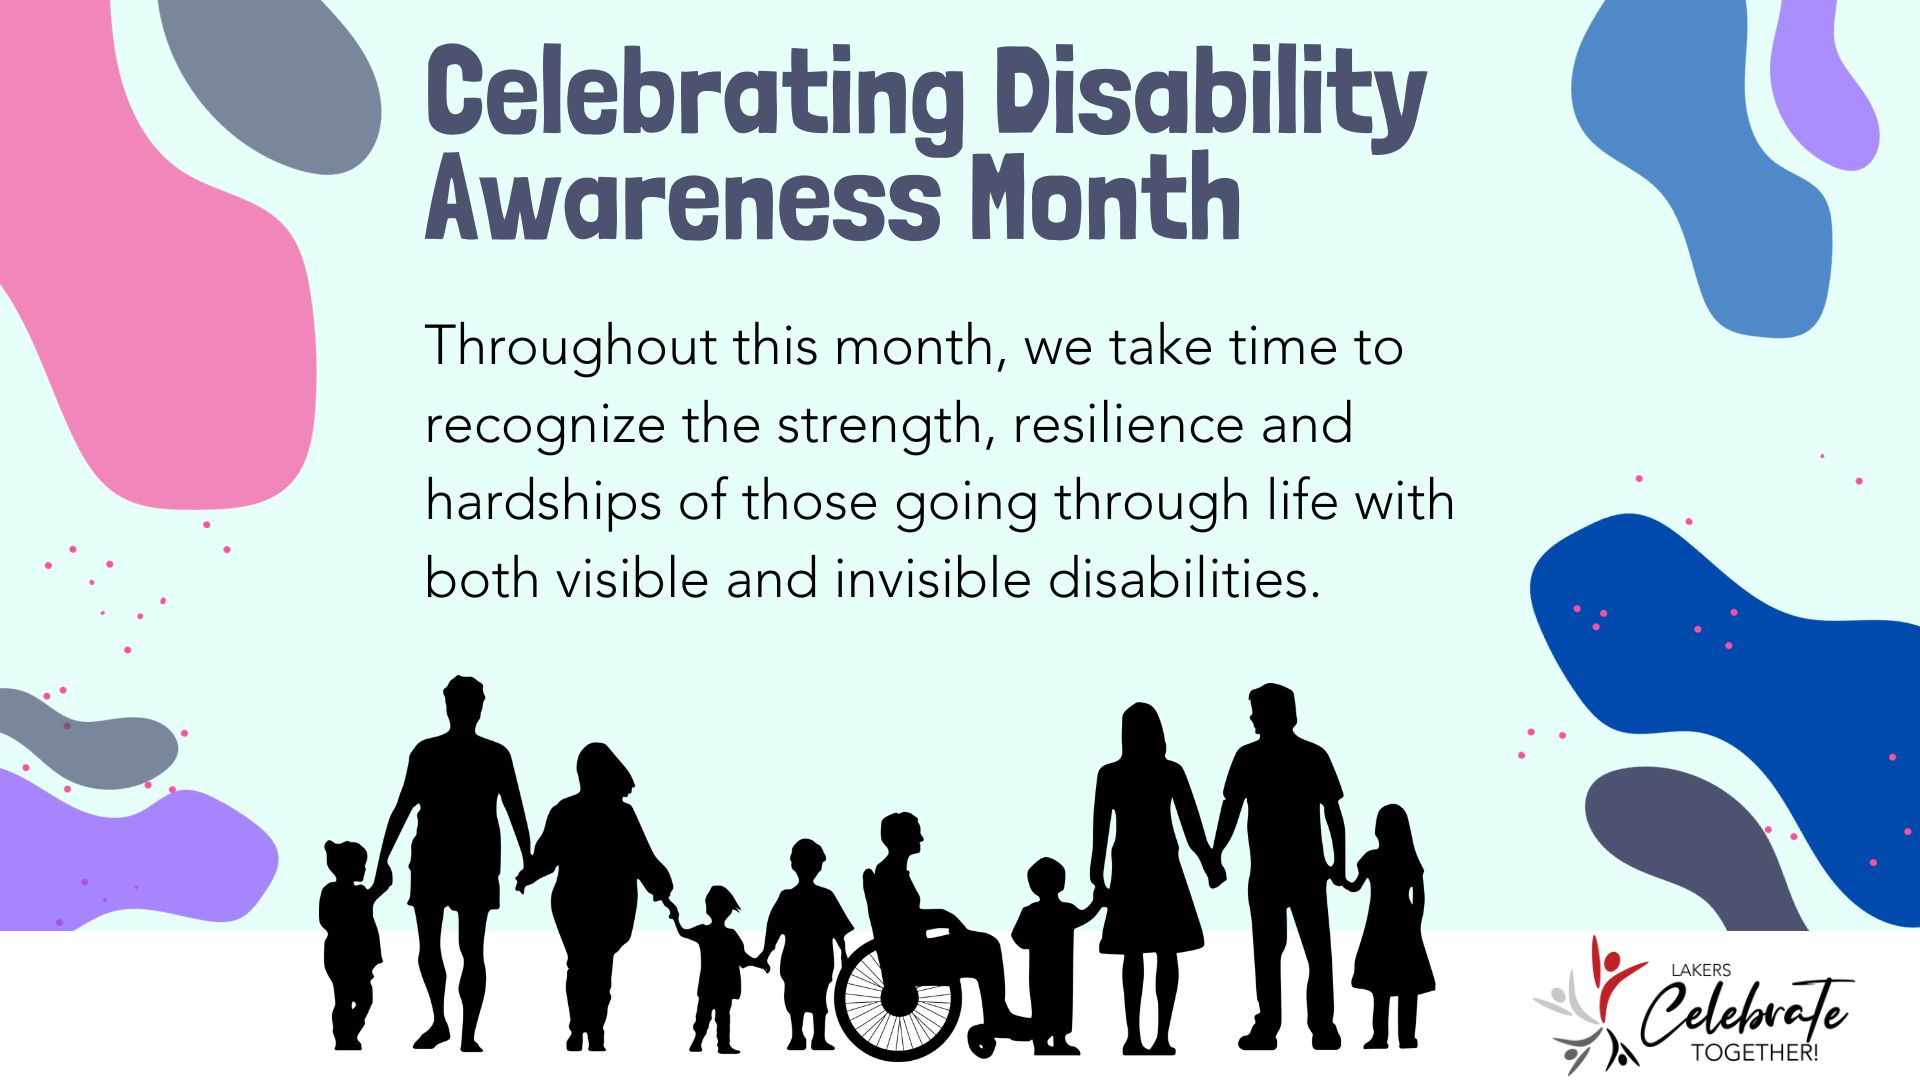 Celebrating Disability Awareness Month
International day of Persons with Disabilities is December 3. On this day, and throughout this month, we take time to recognize the strength, resilience and hardships of those going through life with both visible and invisible disabilities.
Silhouettes of people of various ages, heights, genders and abilities holding hands
Lakers Celebrate Together